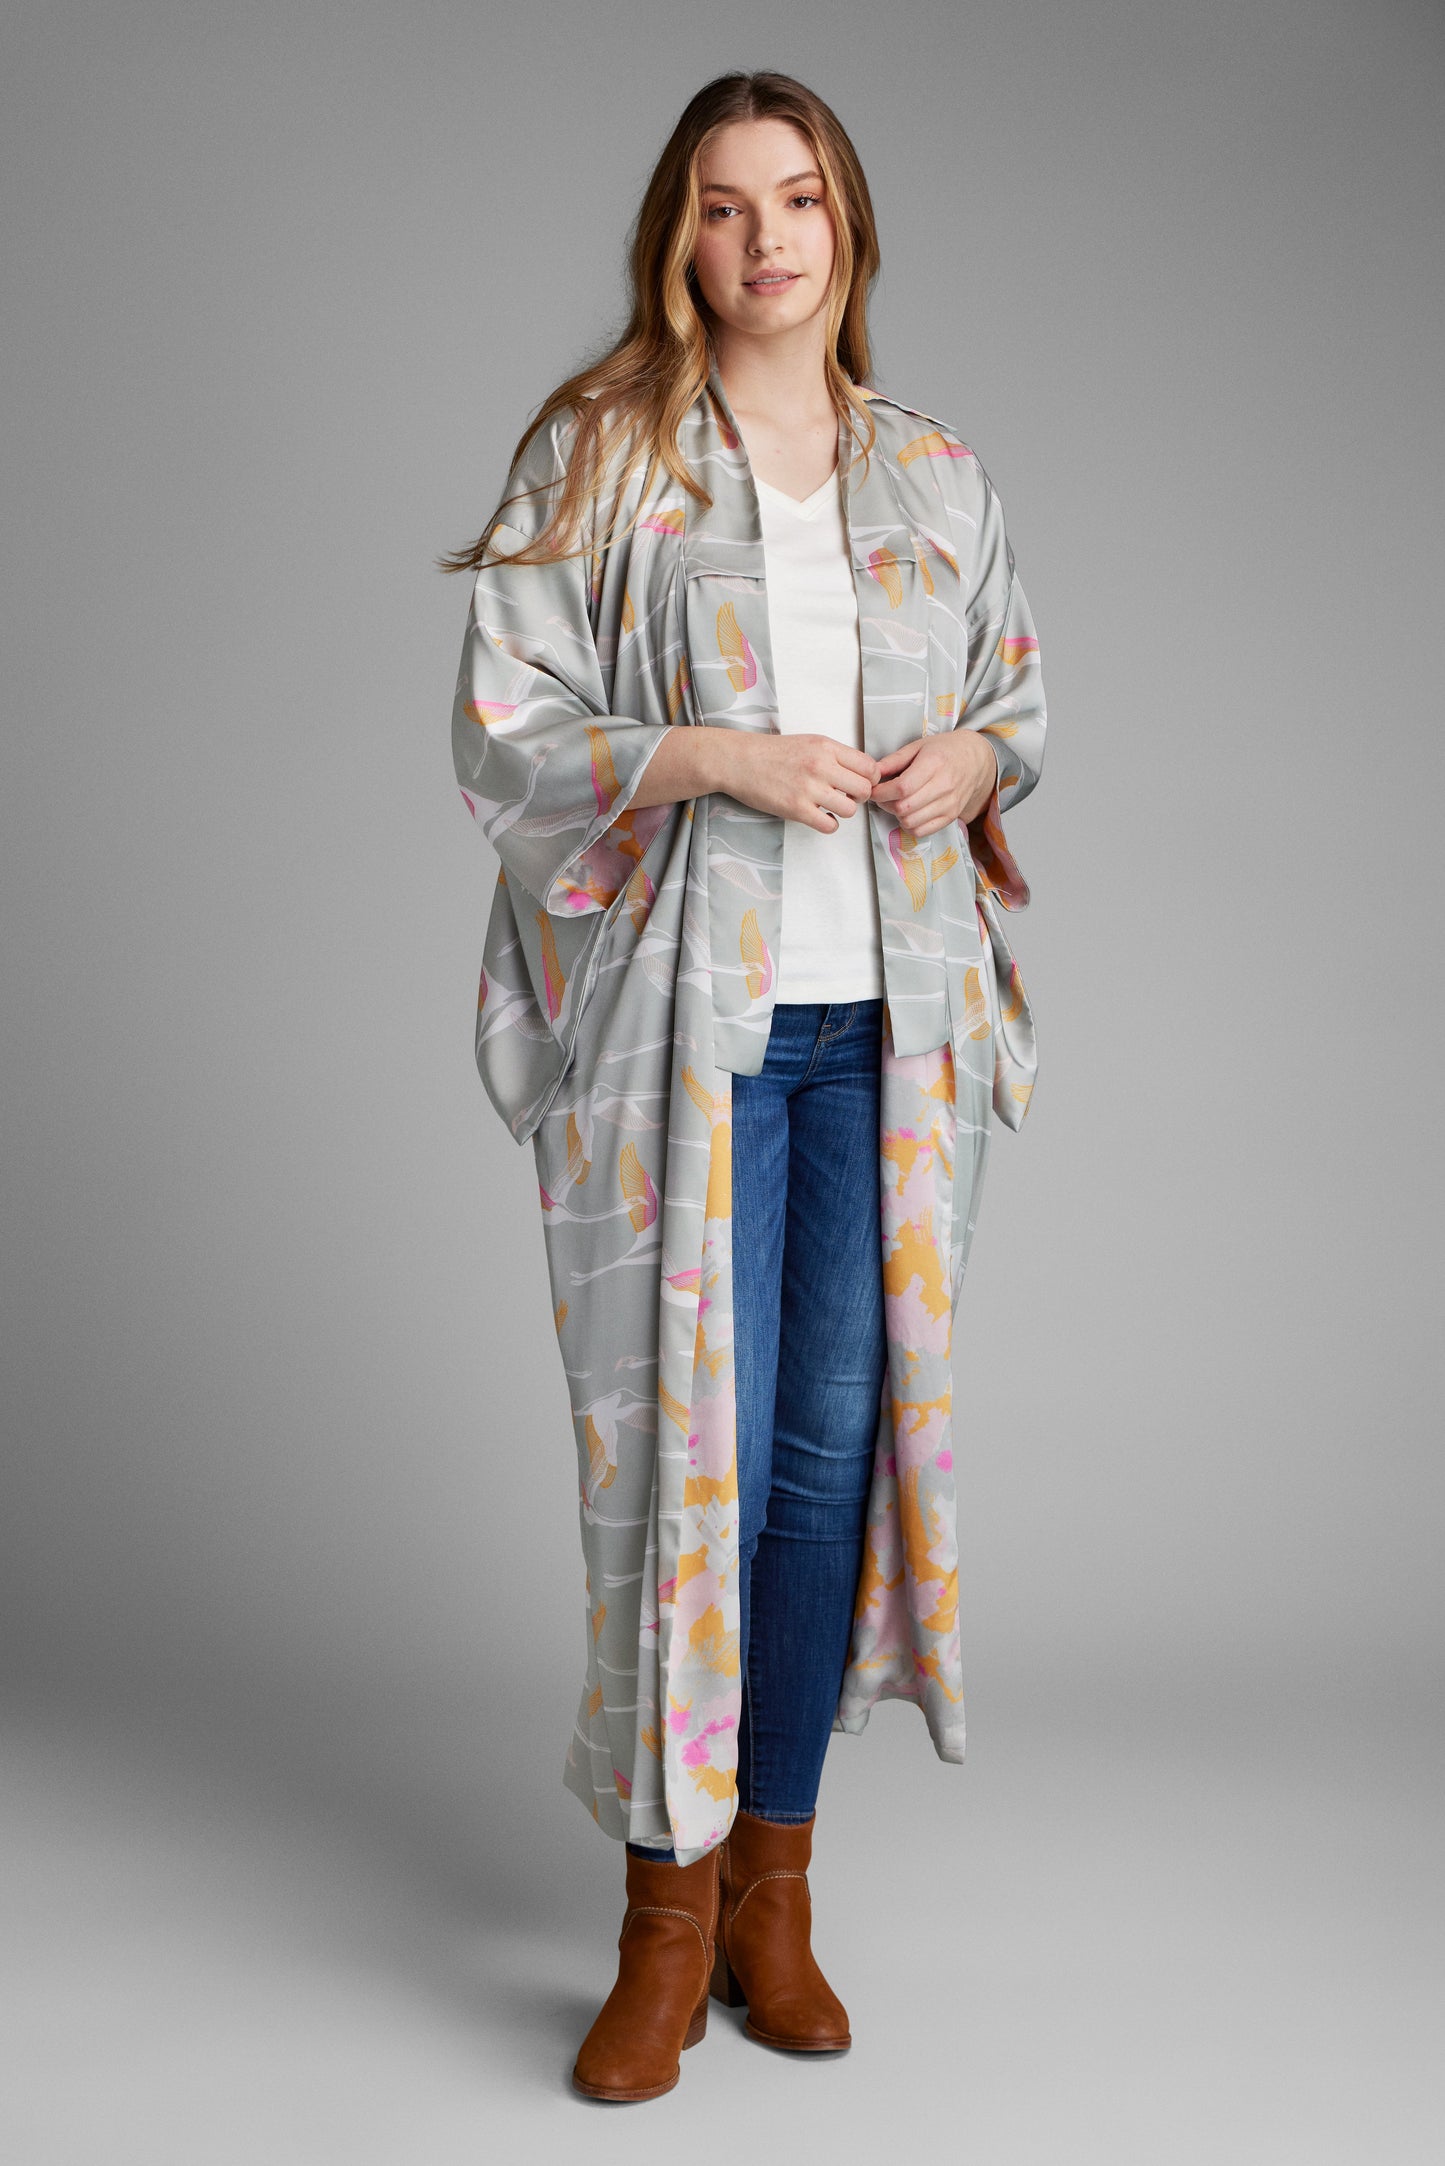 Woman standing wearing a grey pink and gold colored crane print kimono duster made from recycled materials